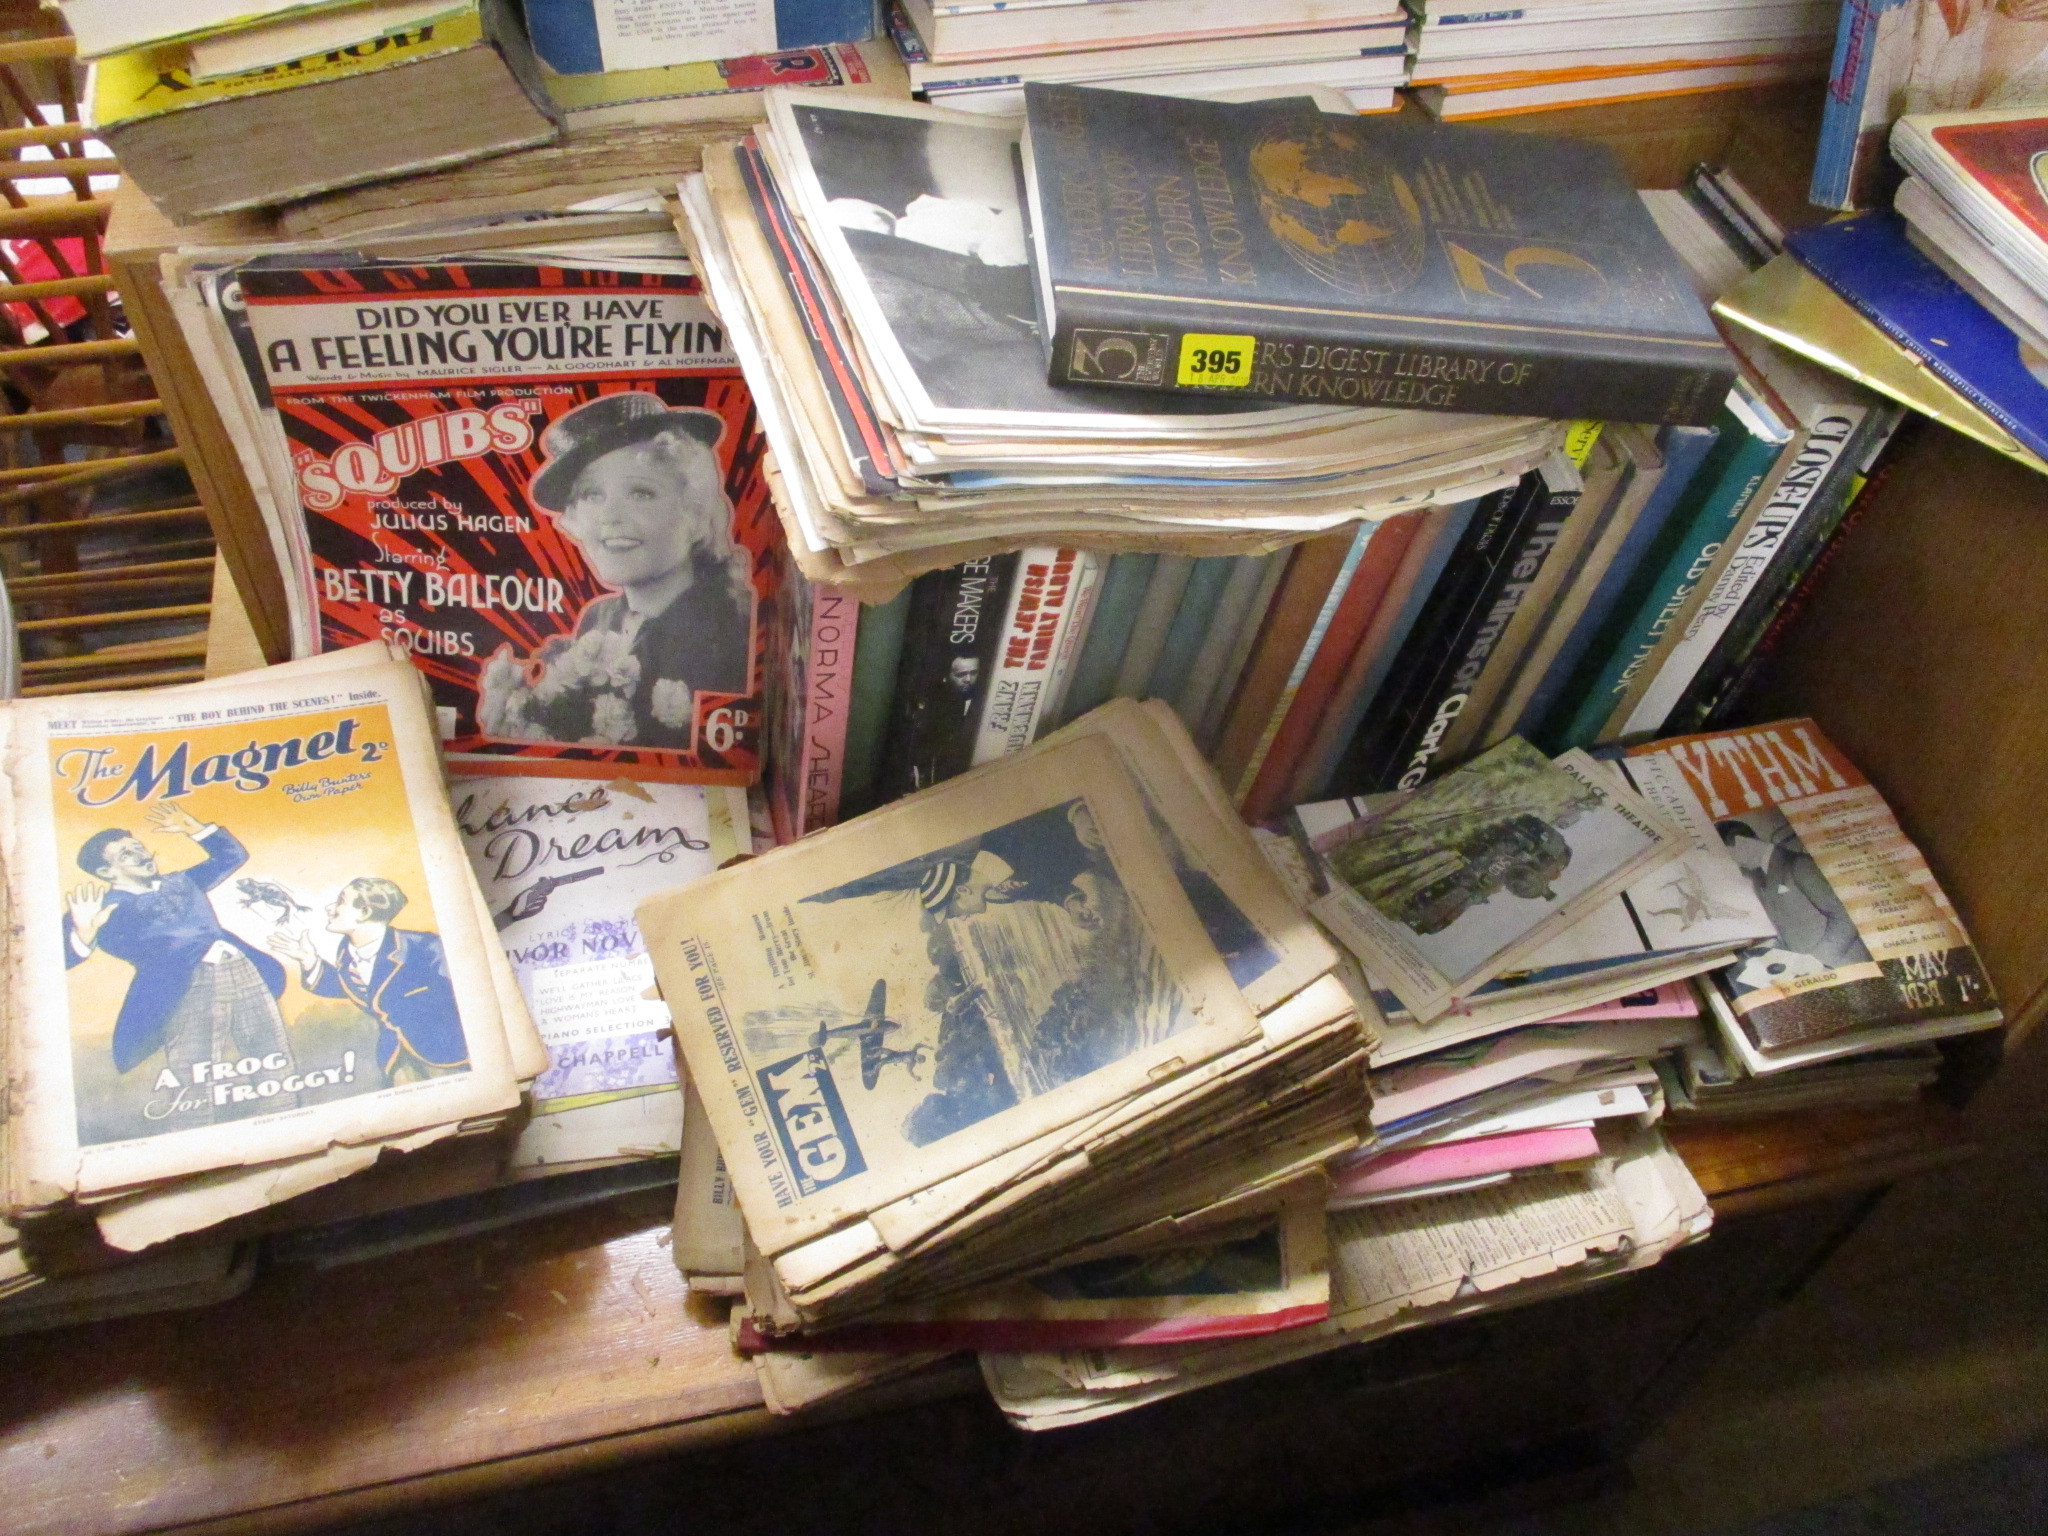 Theatre and film related ephemera to include magazines, books, The Magnet, The Gem and others